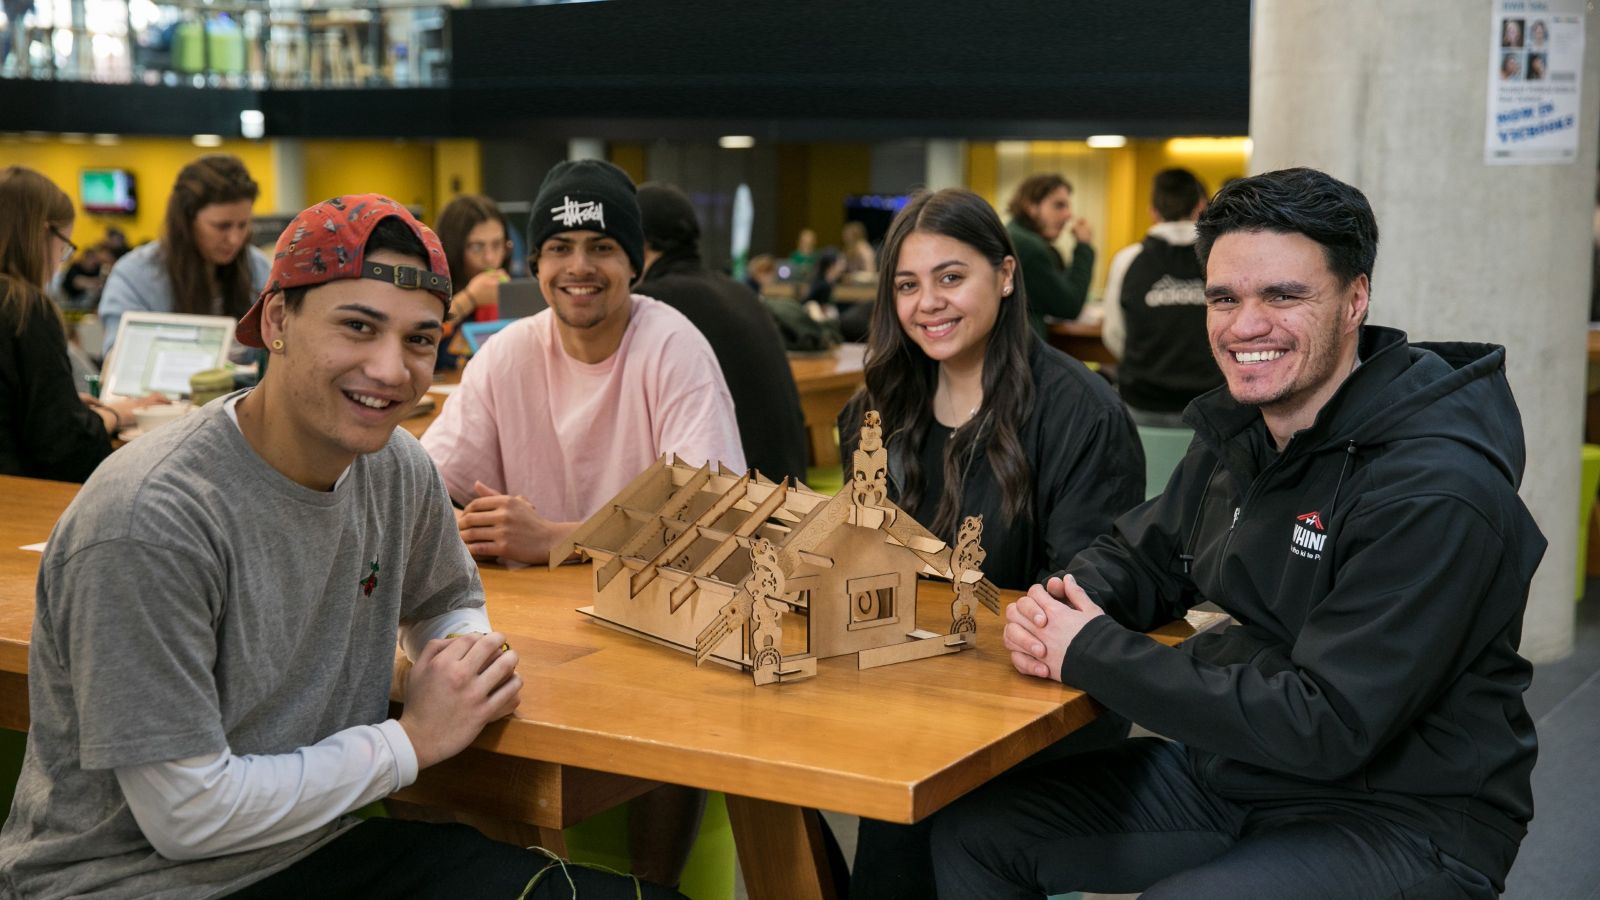 3 boys and 1 girl sitting at a table in the Hub, with a wooden model of a marae on the table in the middle of them.